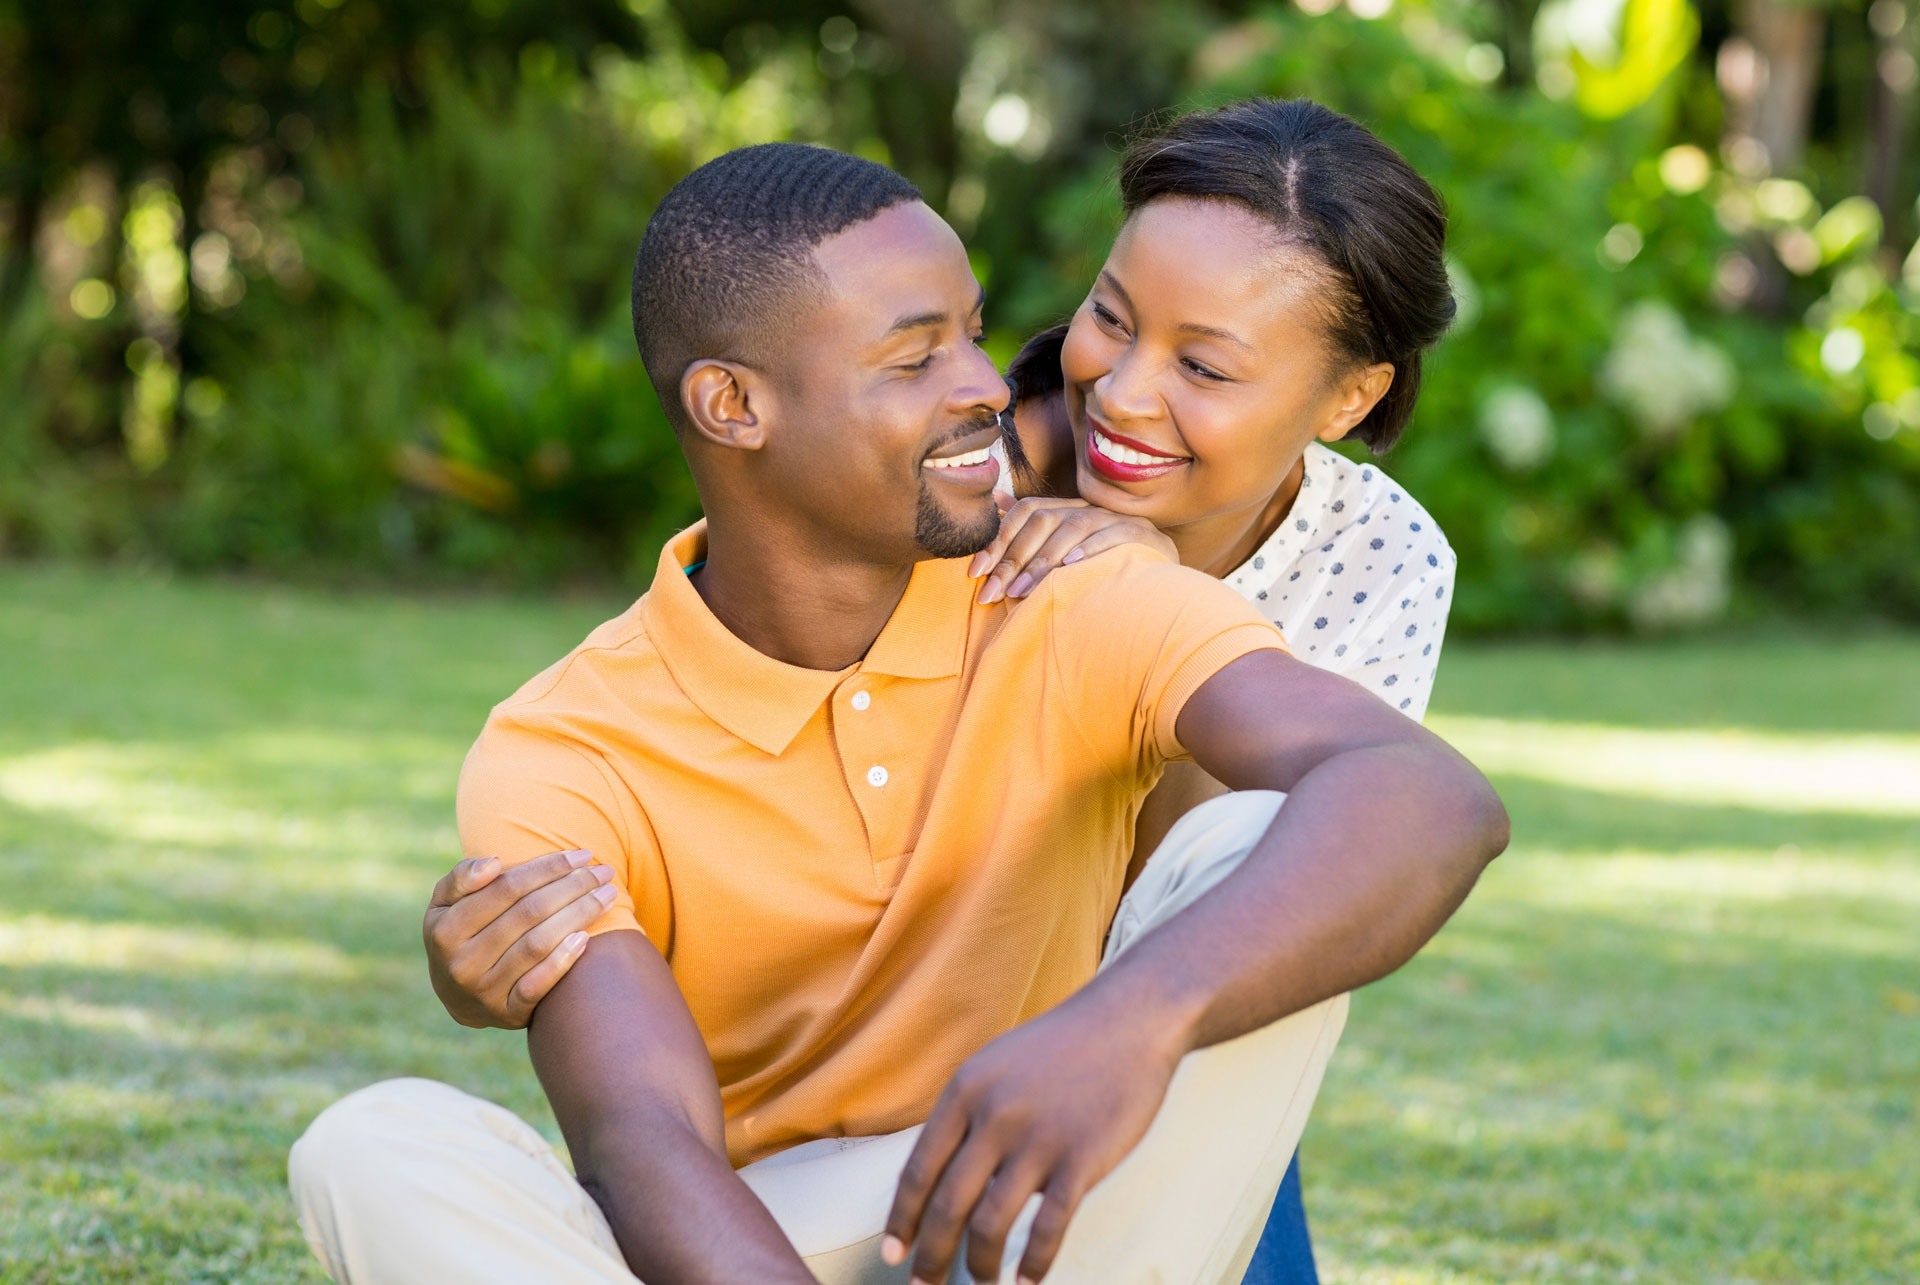 A smiling man and woman, appearing as a couple, showcase their healthy teeth while in an outdoor setting surrounded by lush green nature.